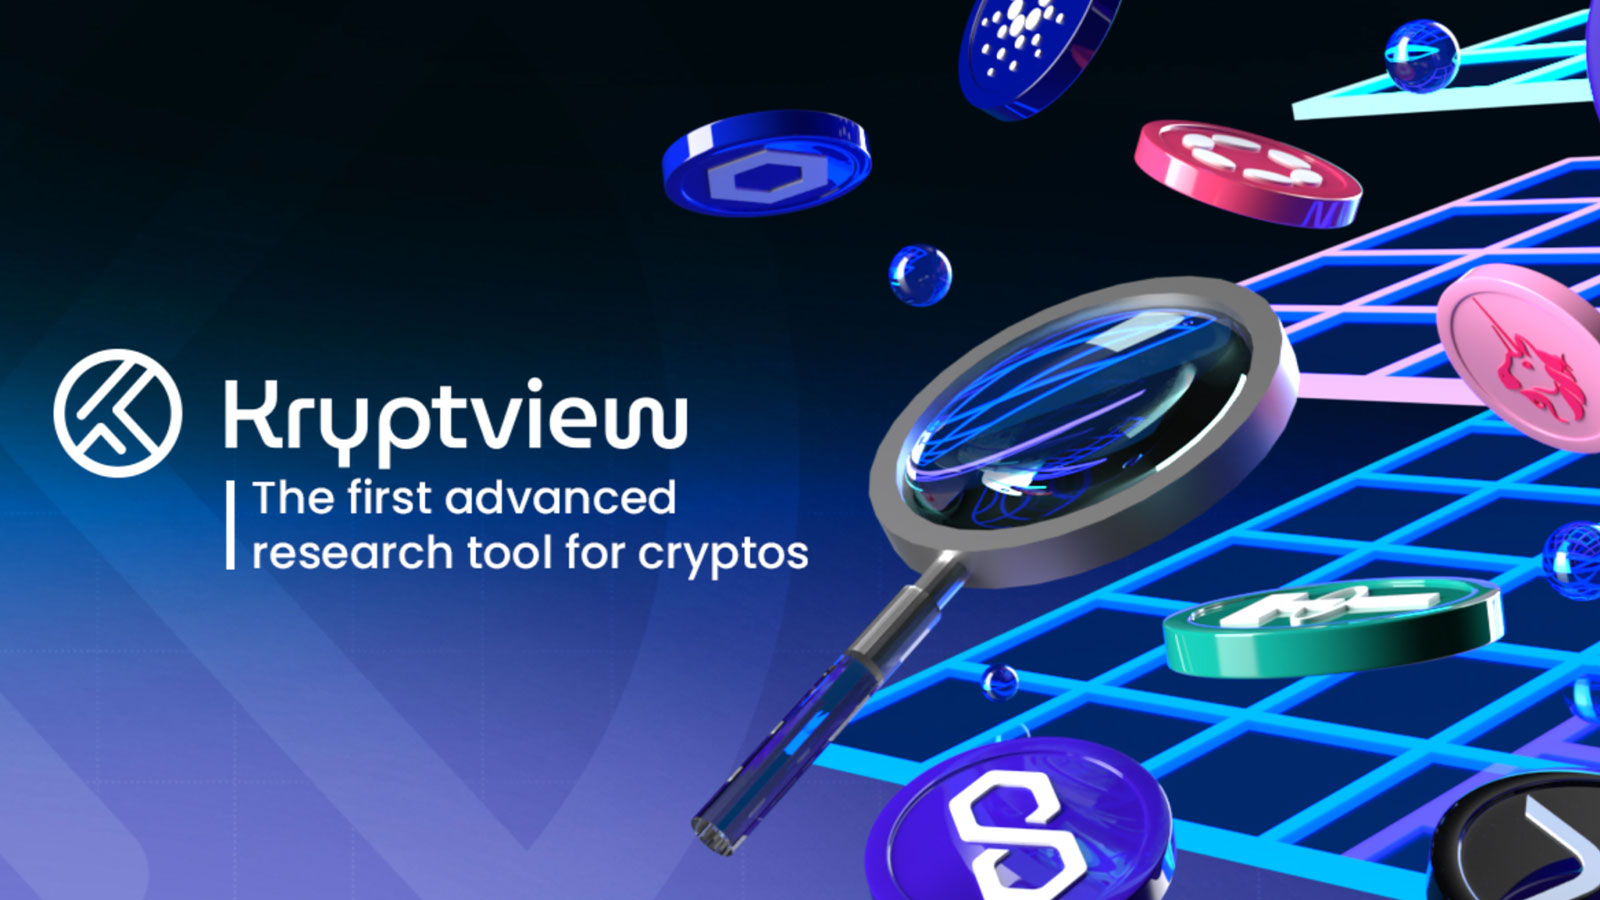 Following a $1.5M Pre-seed Funding, Kryptview Releases the First Power Search Tool for Crypto Projects